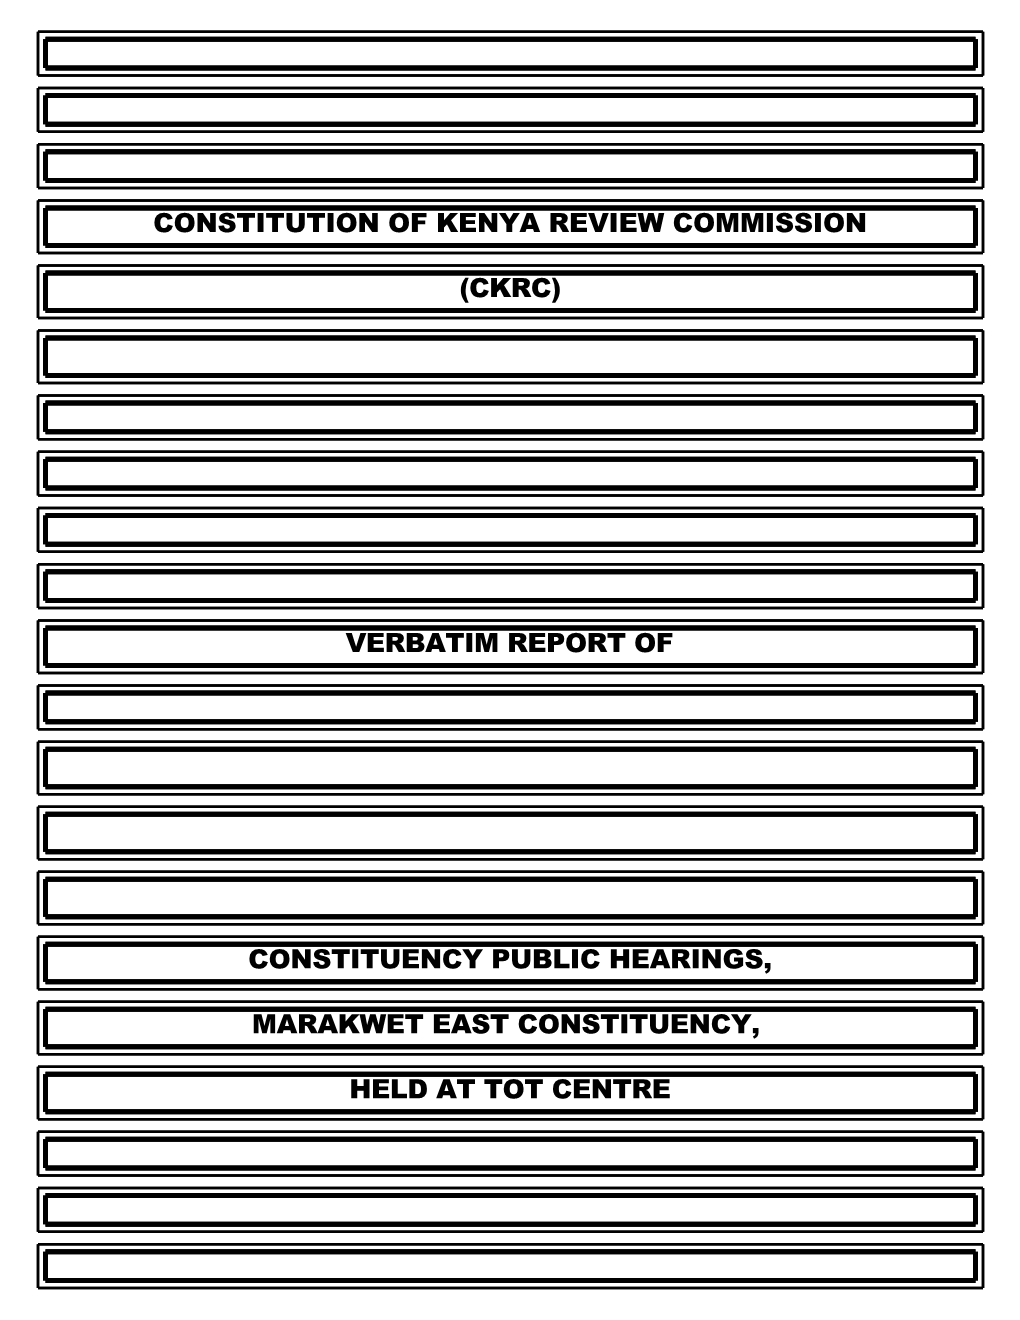 Constitution of Kenya Review Commission